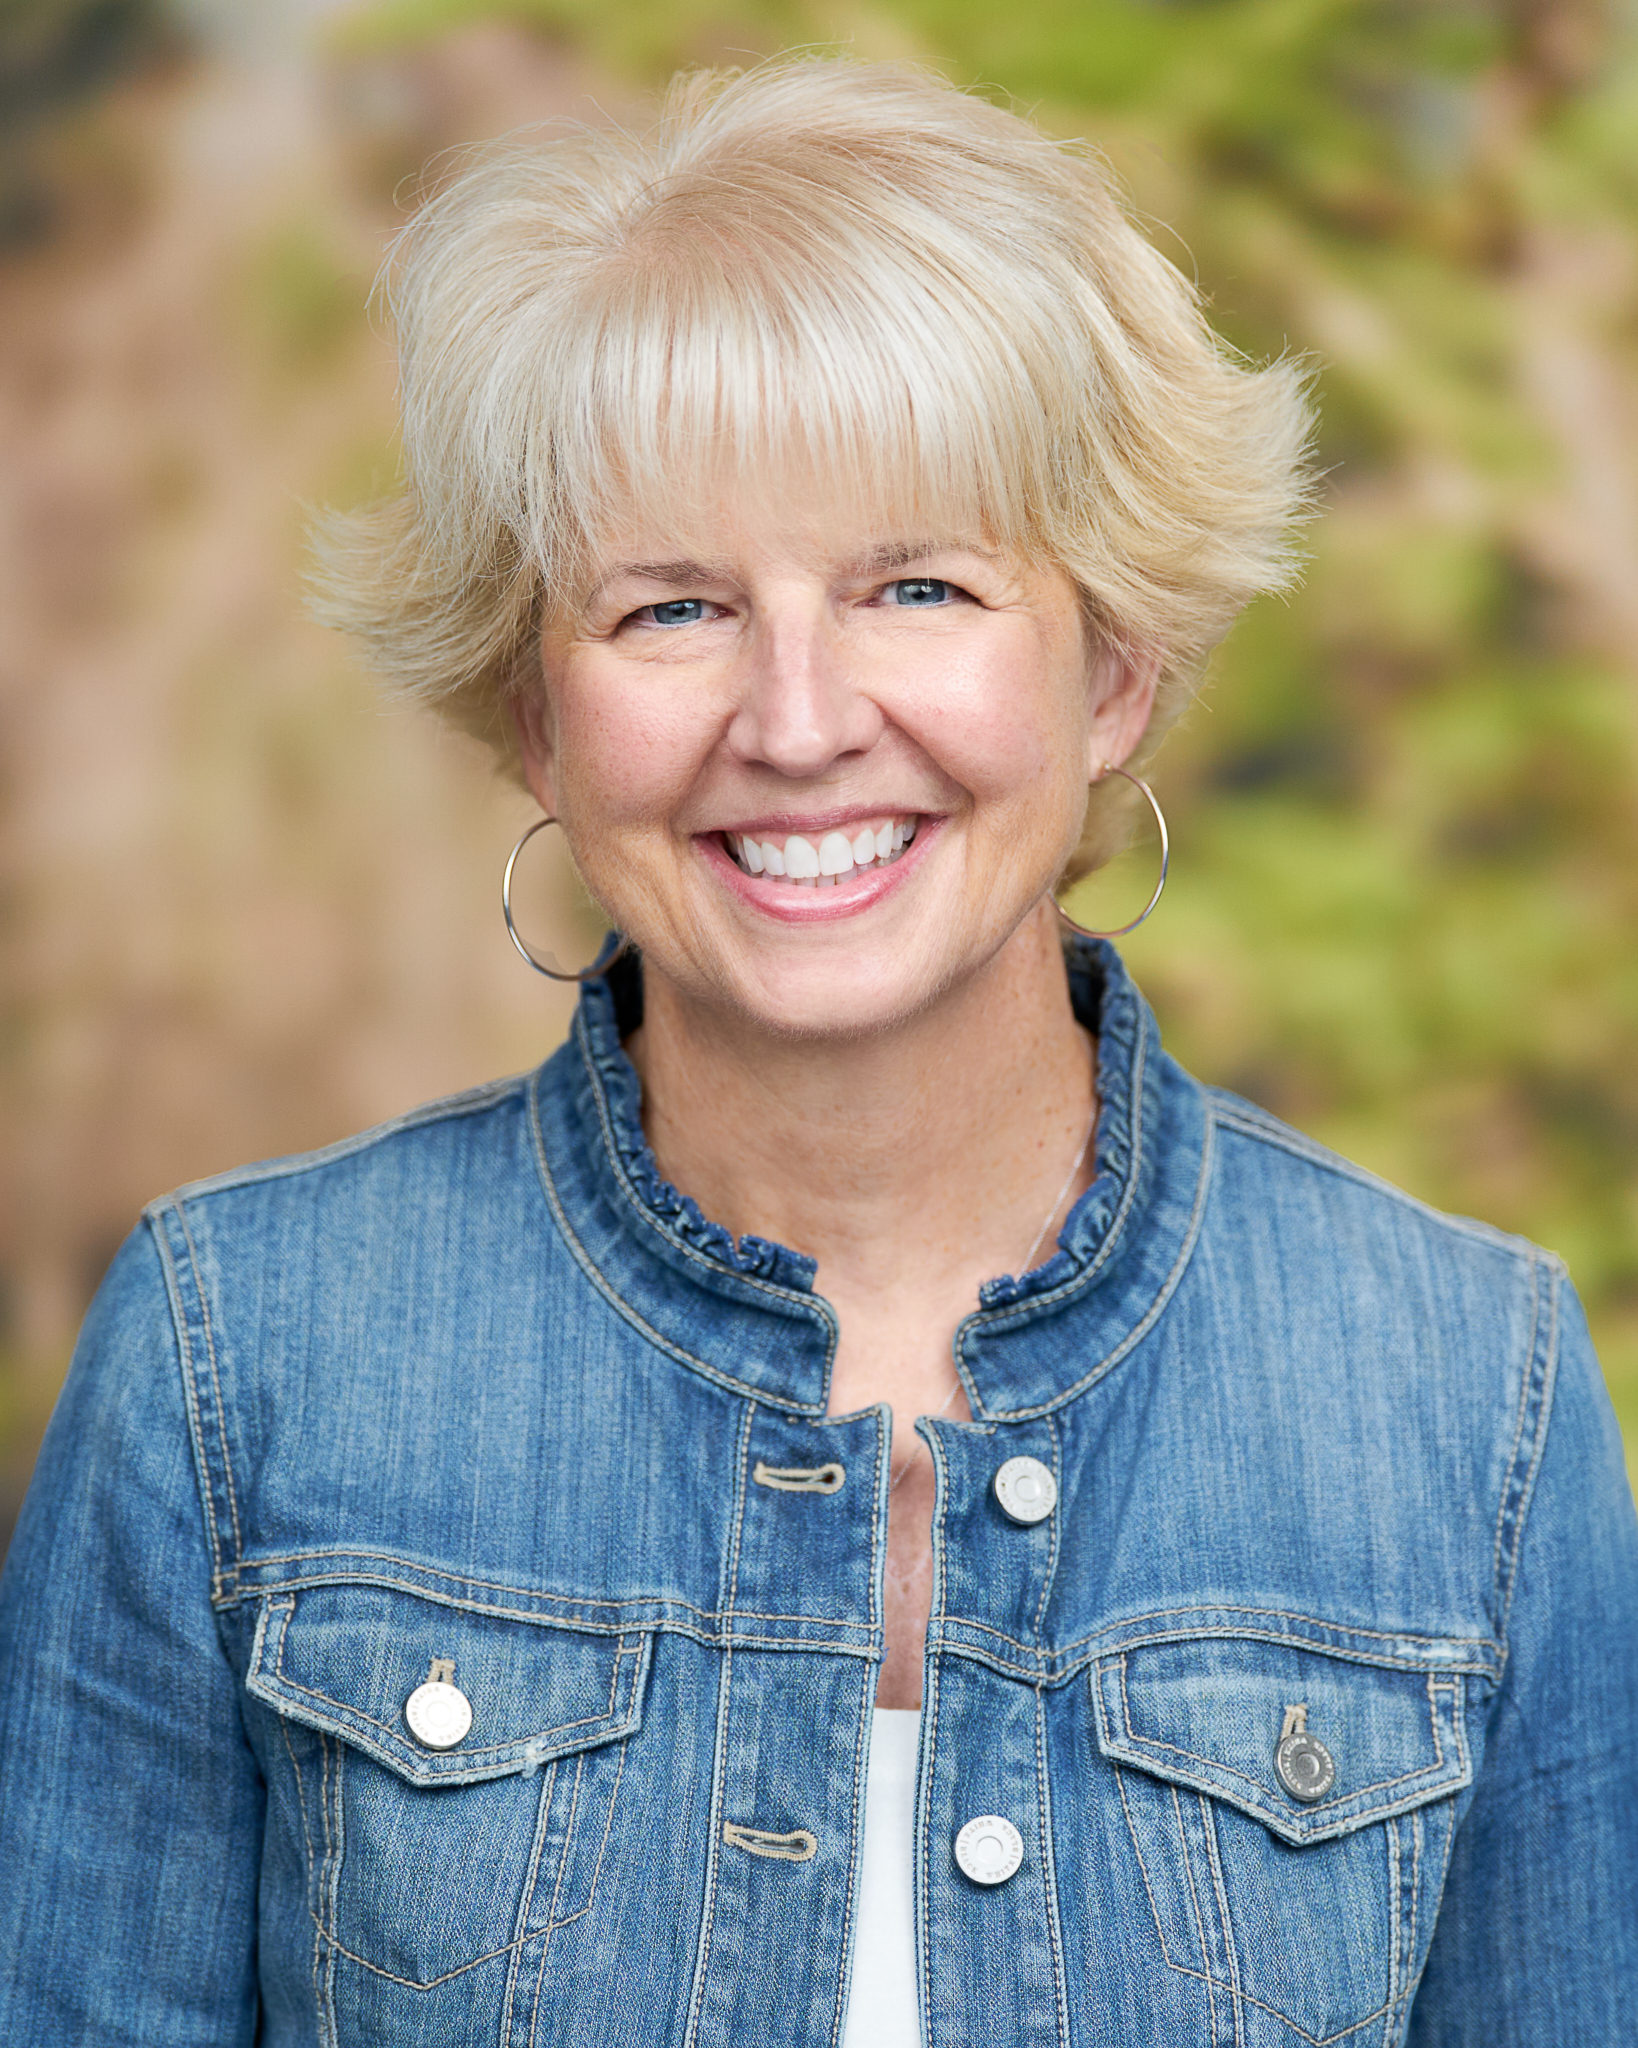 Photo of June Klement. She is a Caucasian woman with white blonde hair. She is wearing a blue denim shirt. She is smiling.